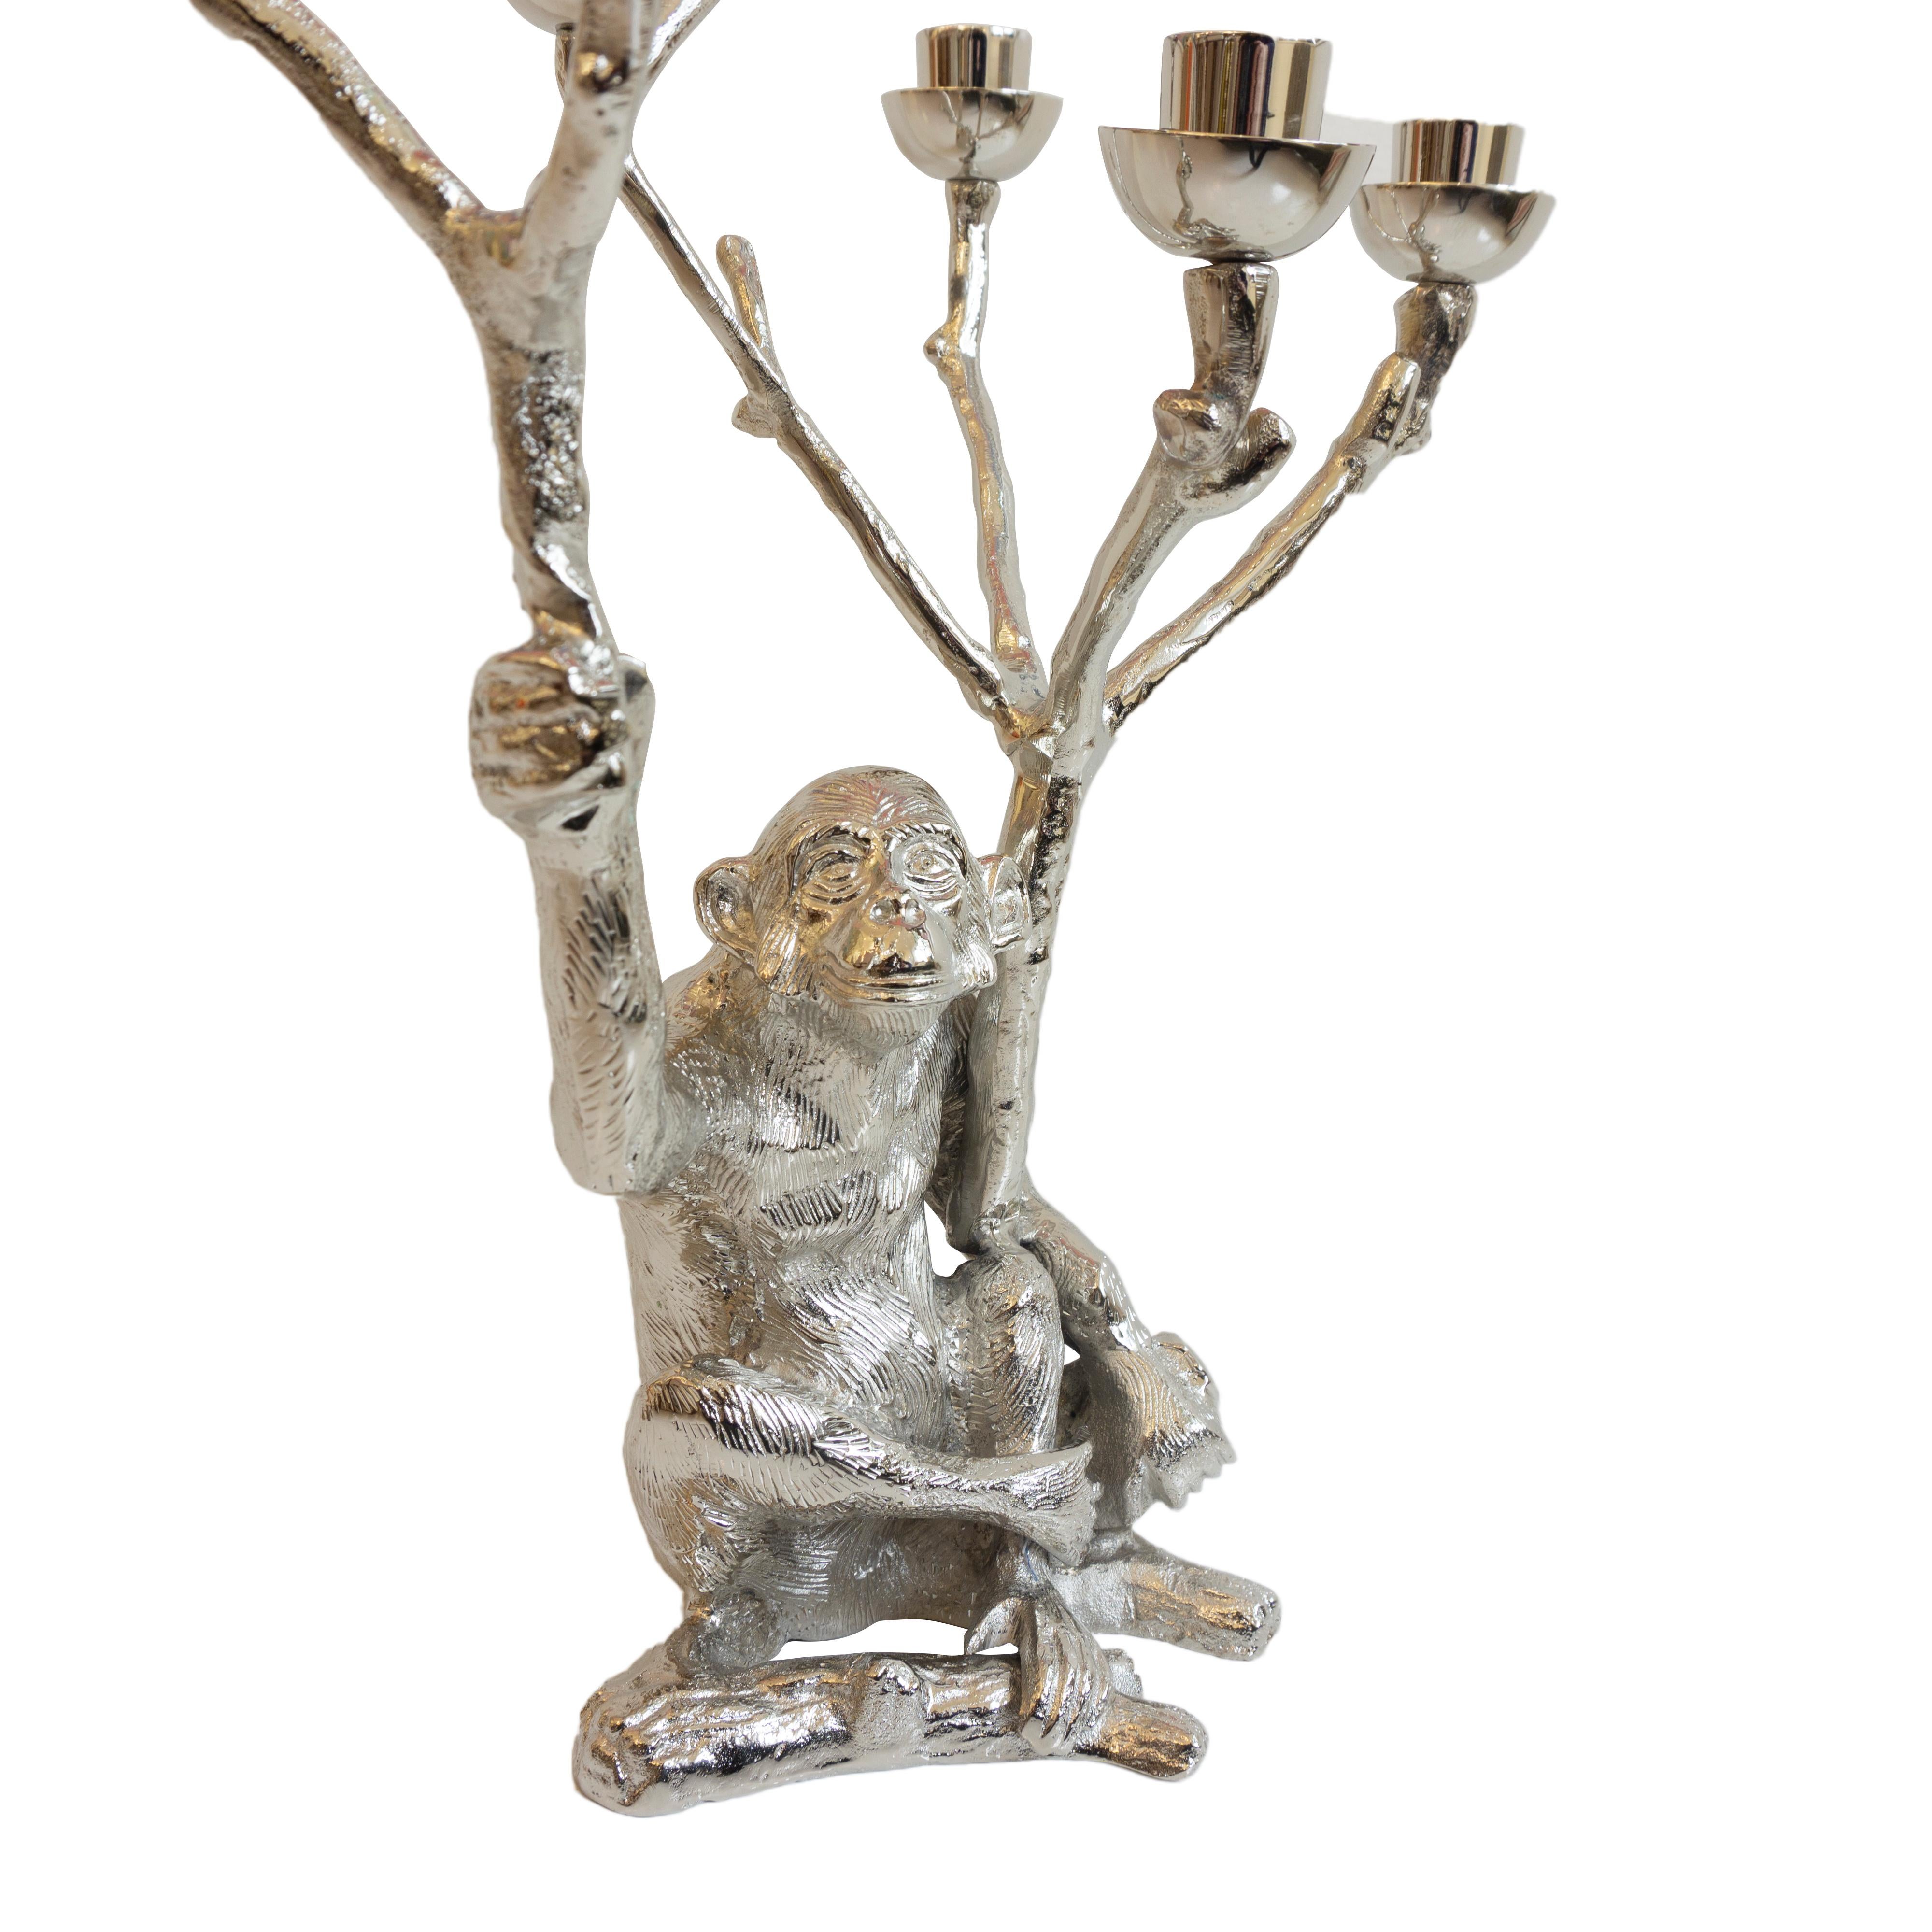 This metal candleholder with a nickel plated finish features a monkey holding two branches. Fits seven tapered candles. 

Dimensions: 16” height x 12” diameter.

   